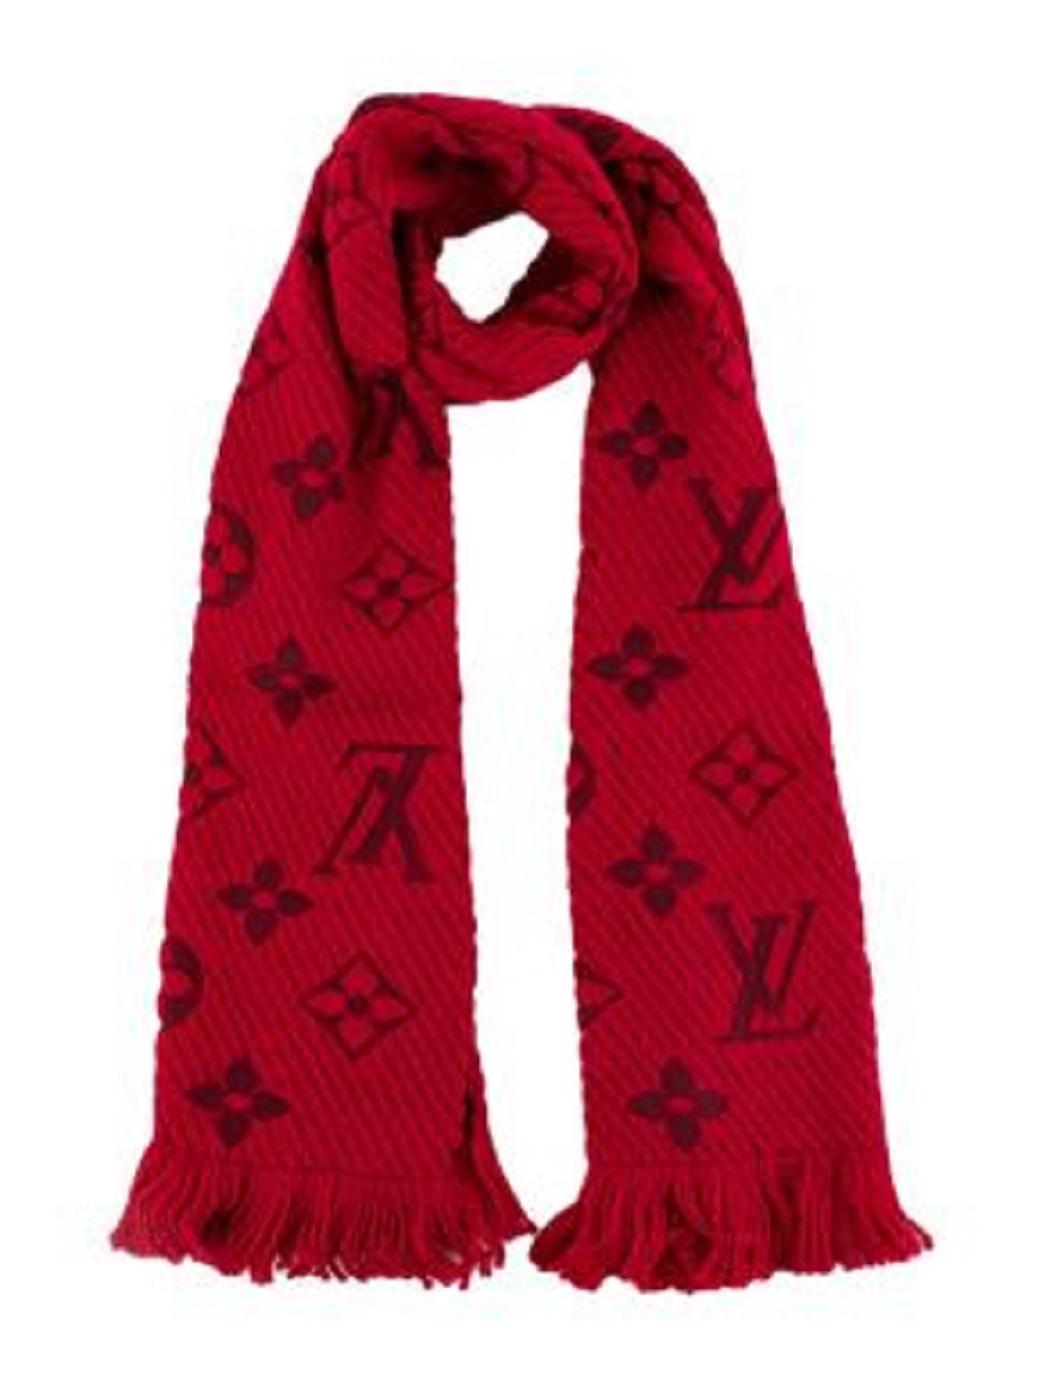 Louis Vuitton Red Logomania Shine Shawl 

- LV jacquard monogram throughout
- Frilled edges
- Knitted

Material
94% Wool, 6% Silk

Dry clean only

Made in Italy

PLEASE NOTE, THESE ITEMS ARE PRE-OWNED AND MAY SHOW SIGNS OF BEING STORED EVEN WHEN